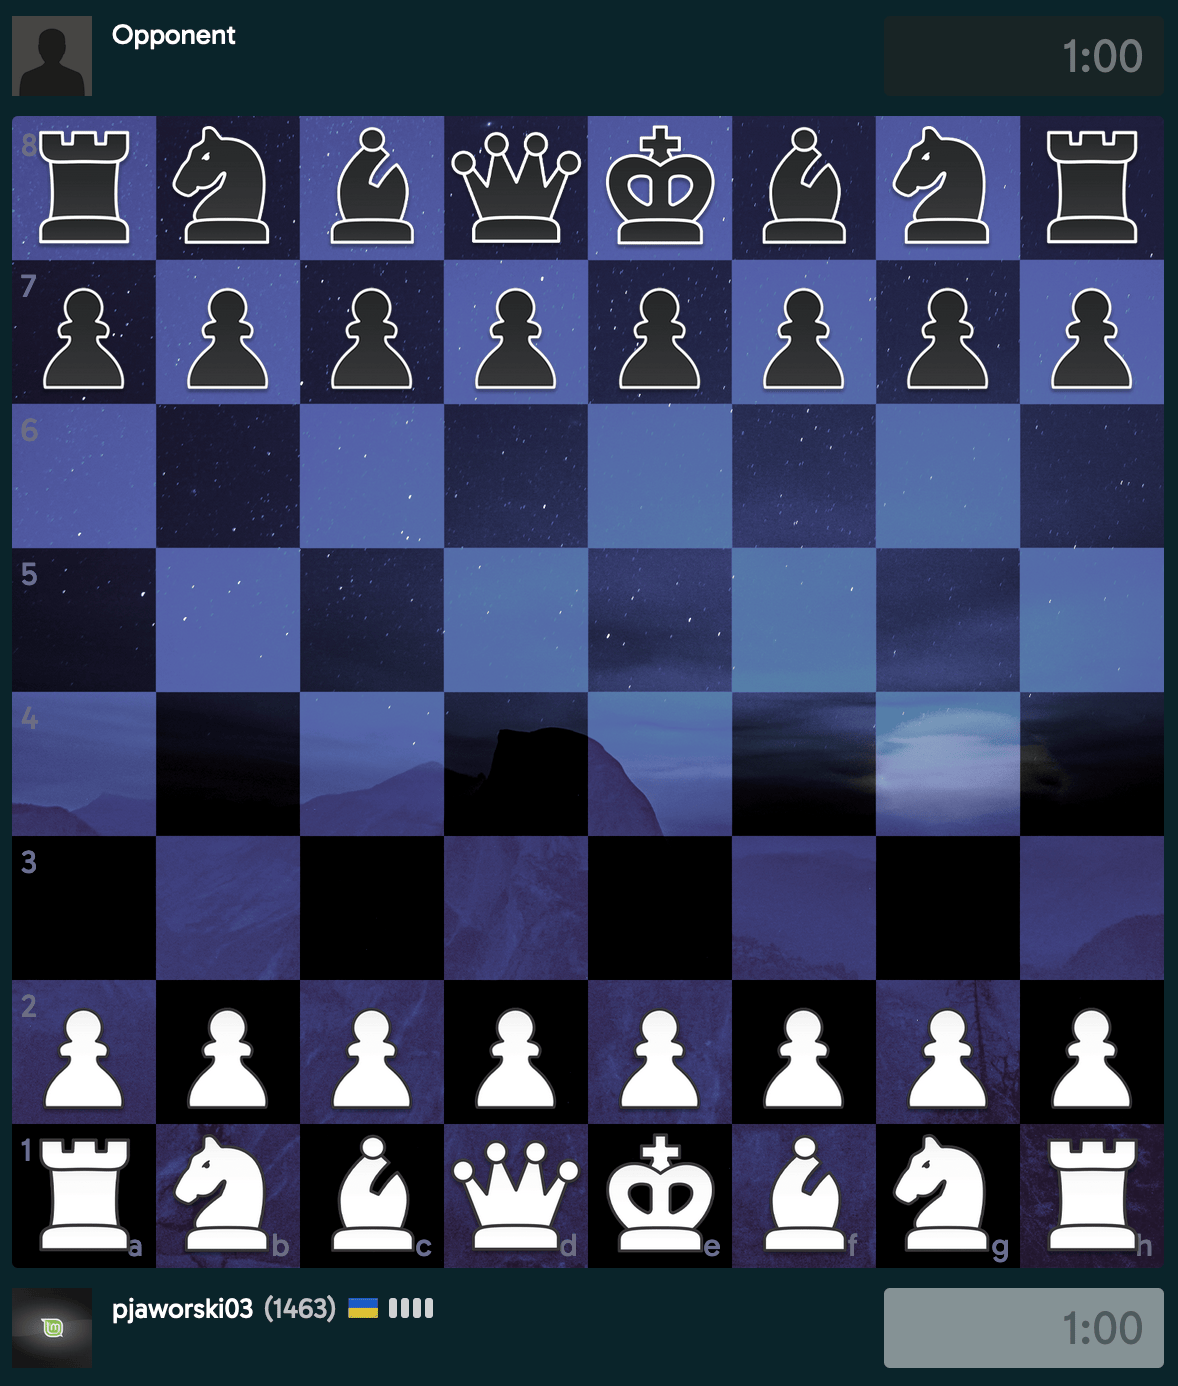 My new app for chess game analysis from any website/video - Chess Forums 